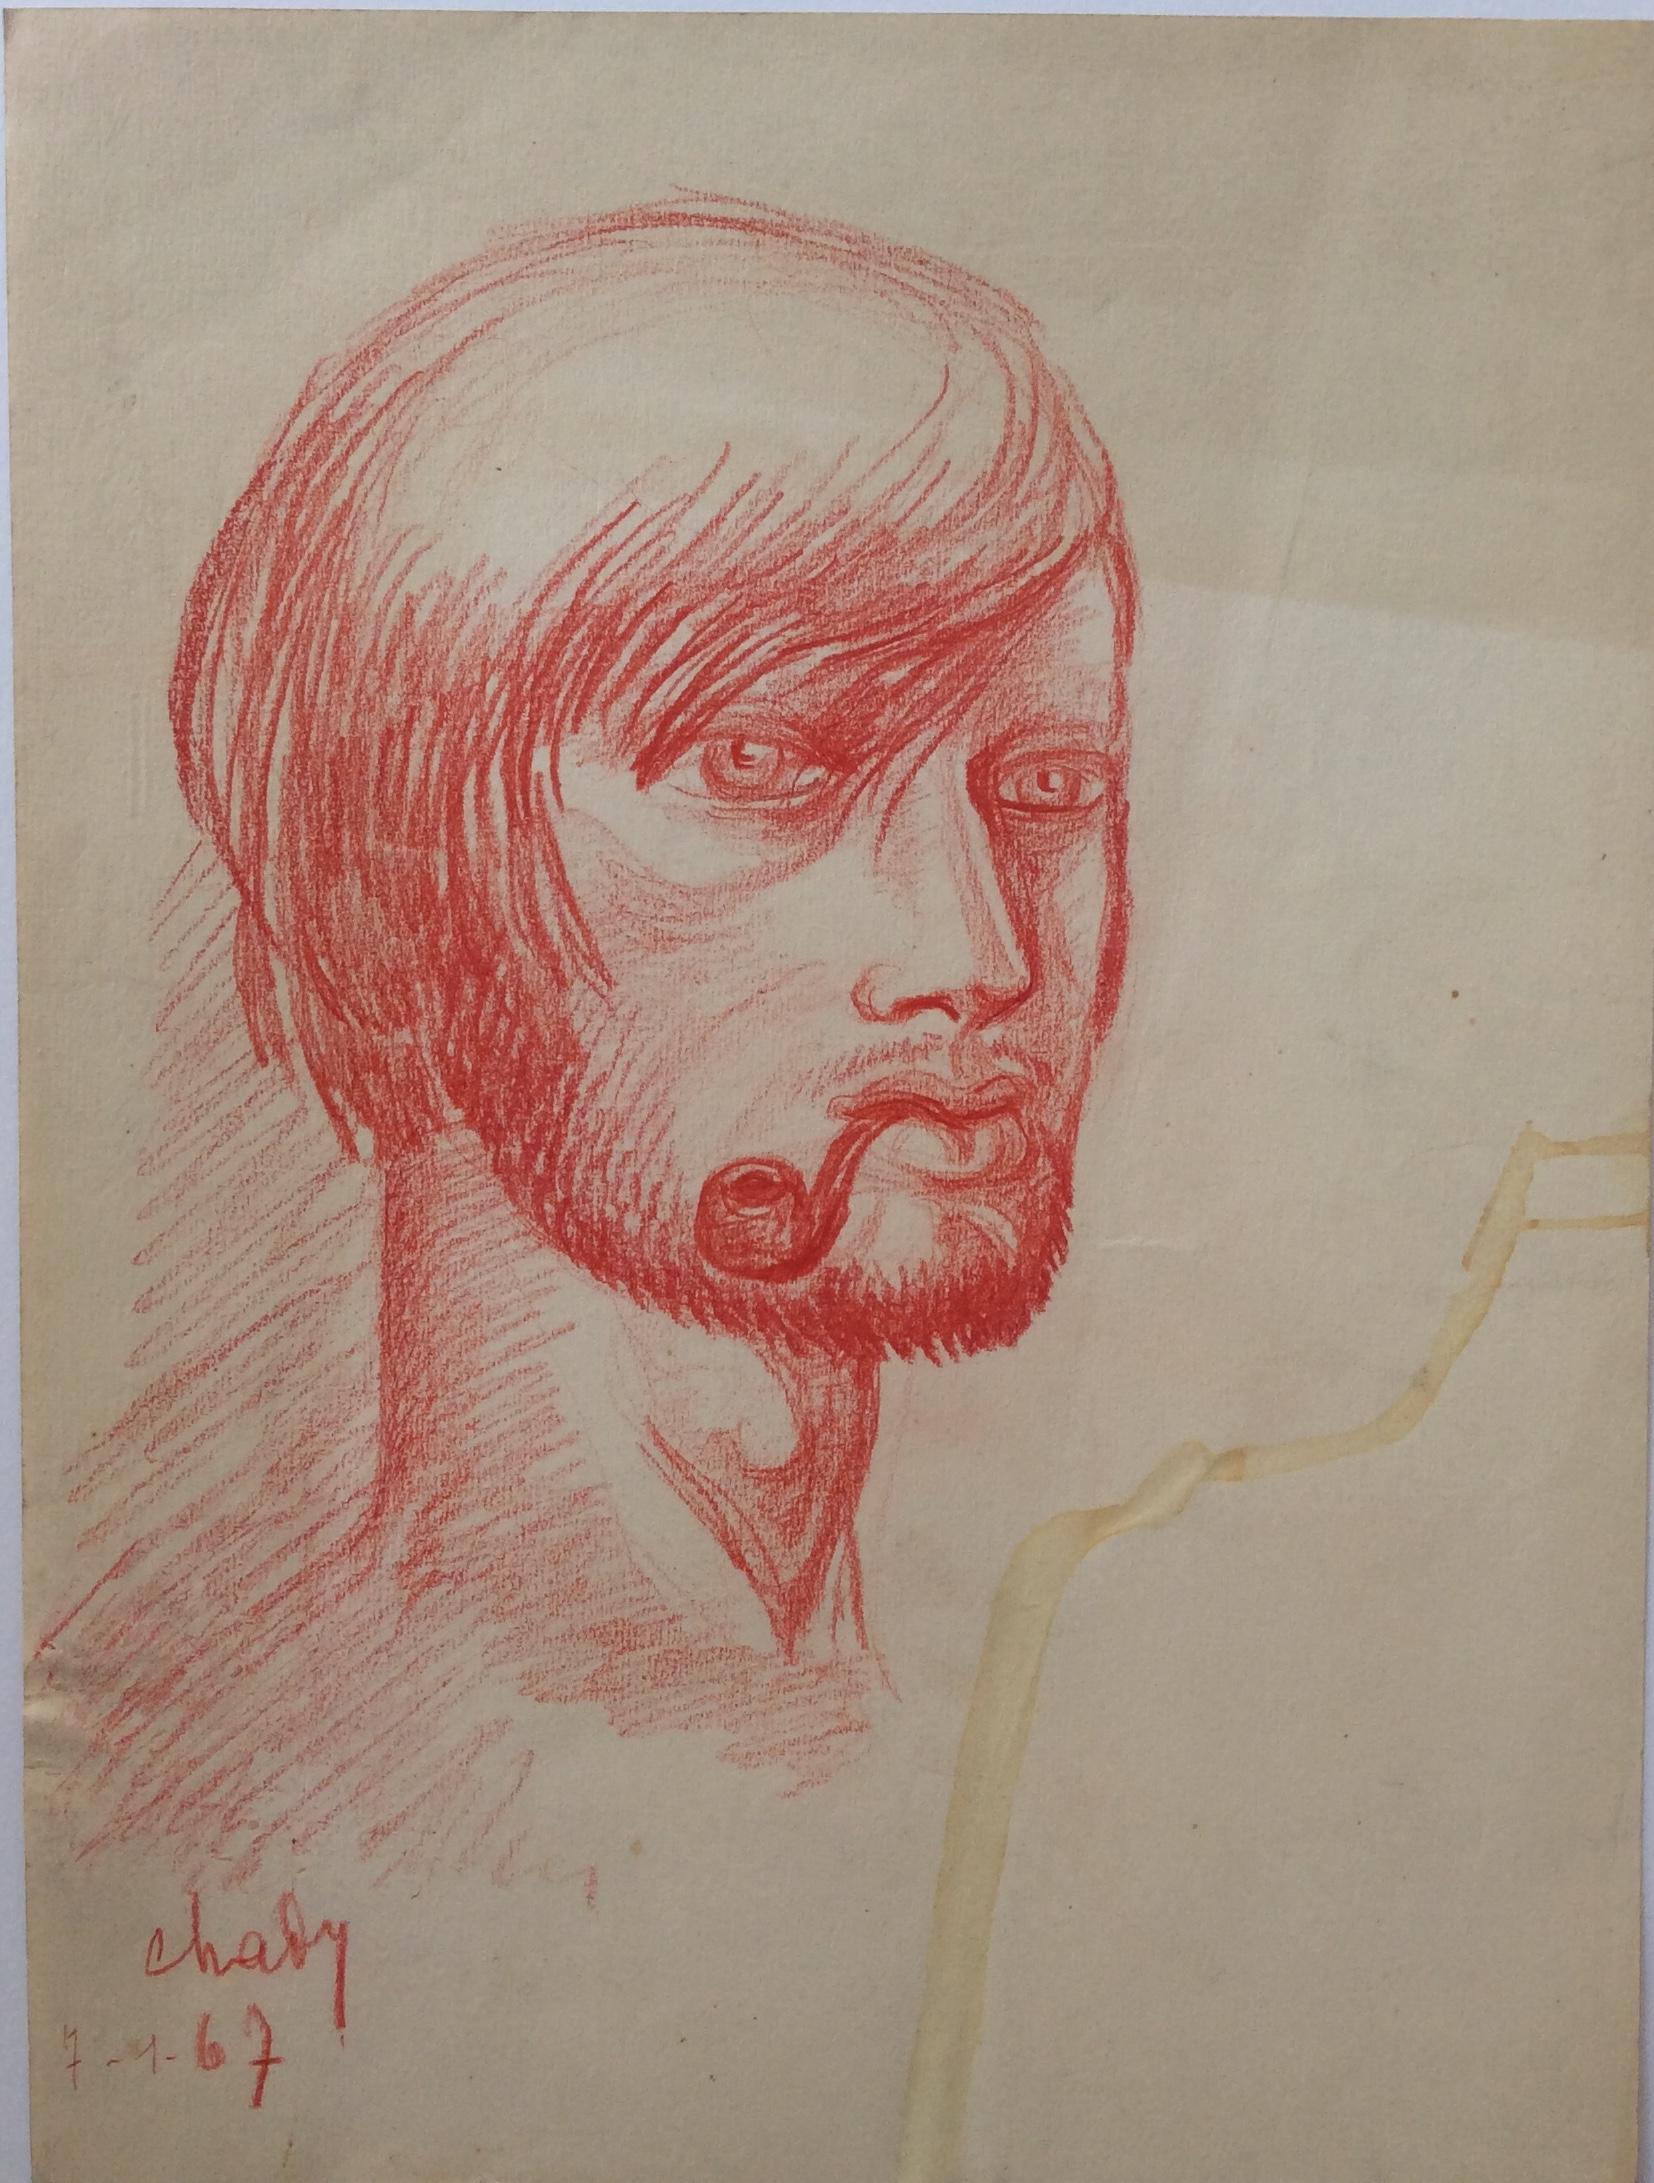 French Midcentury Original Portrait Drawing Signed Chady Dated 1967 For Sale